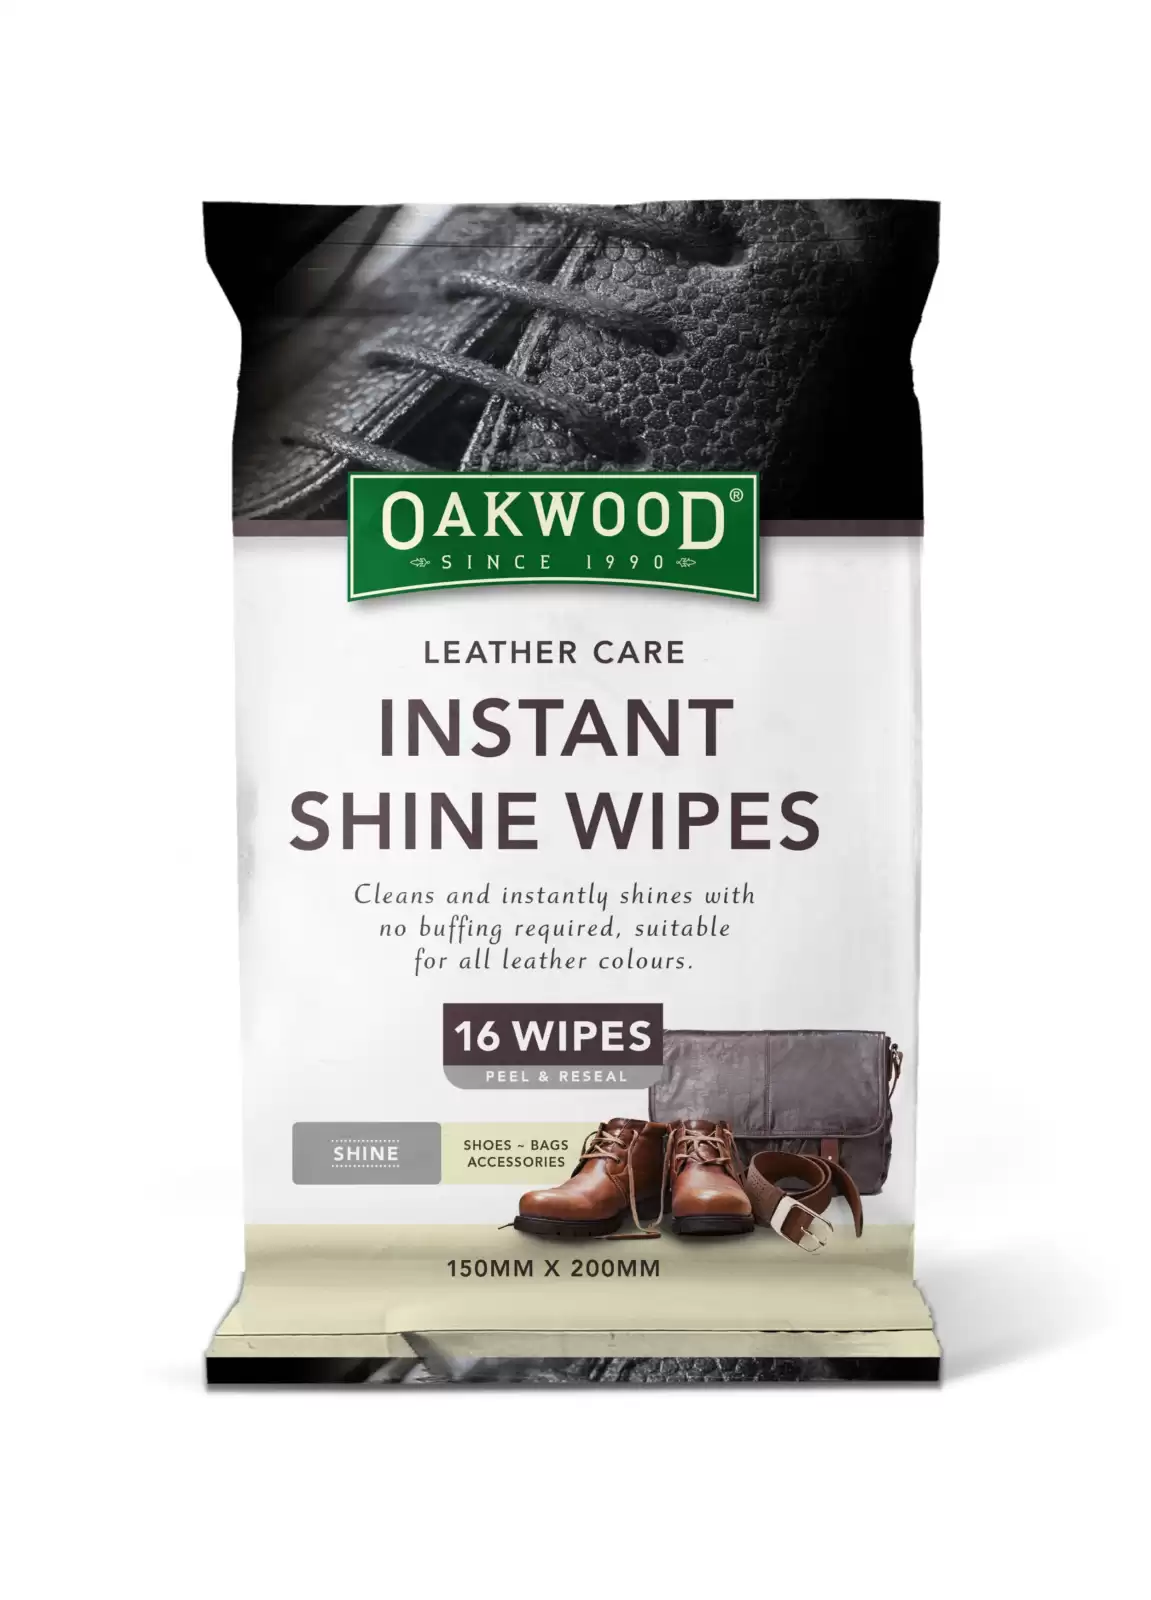 Oakwood Instant Care Instant Shine Wipes